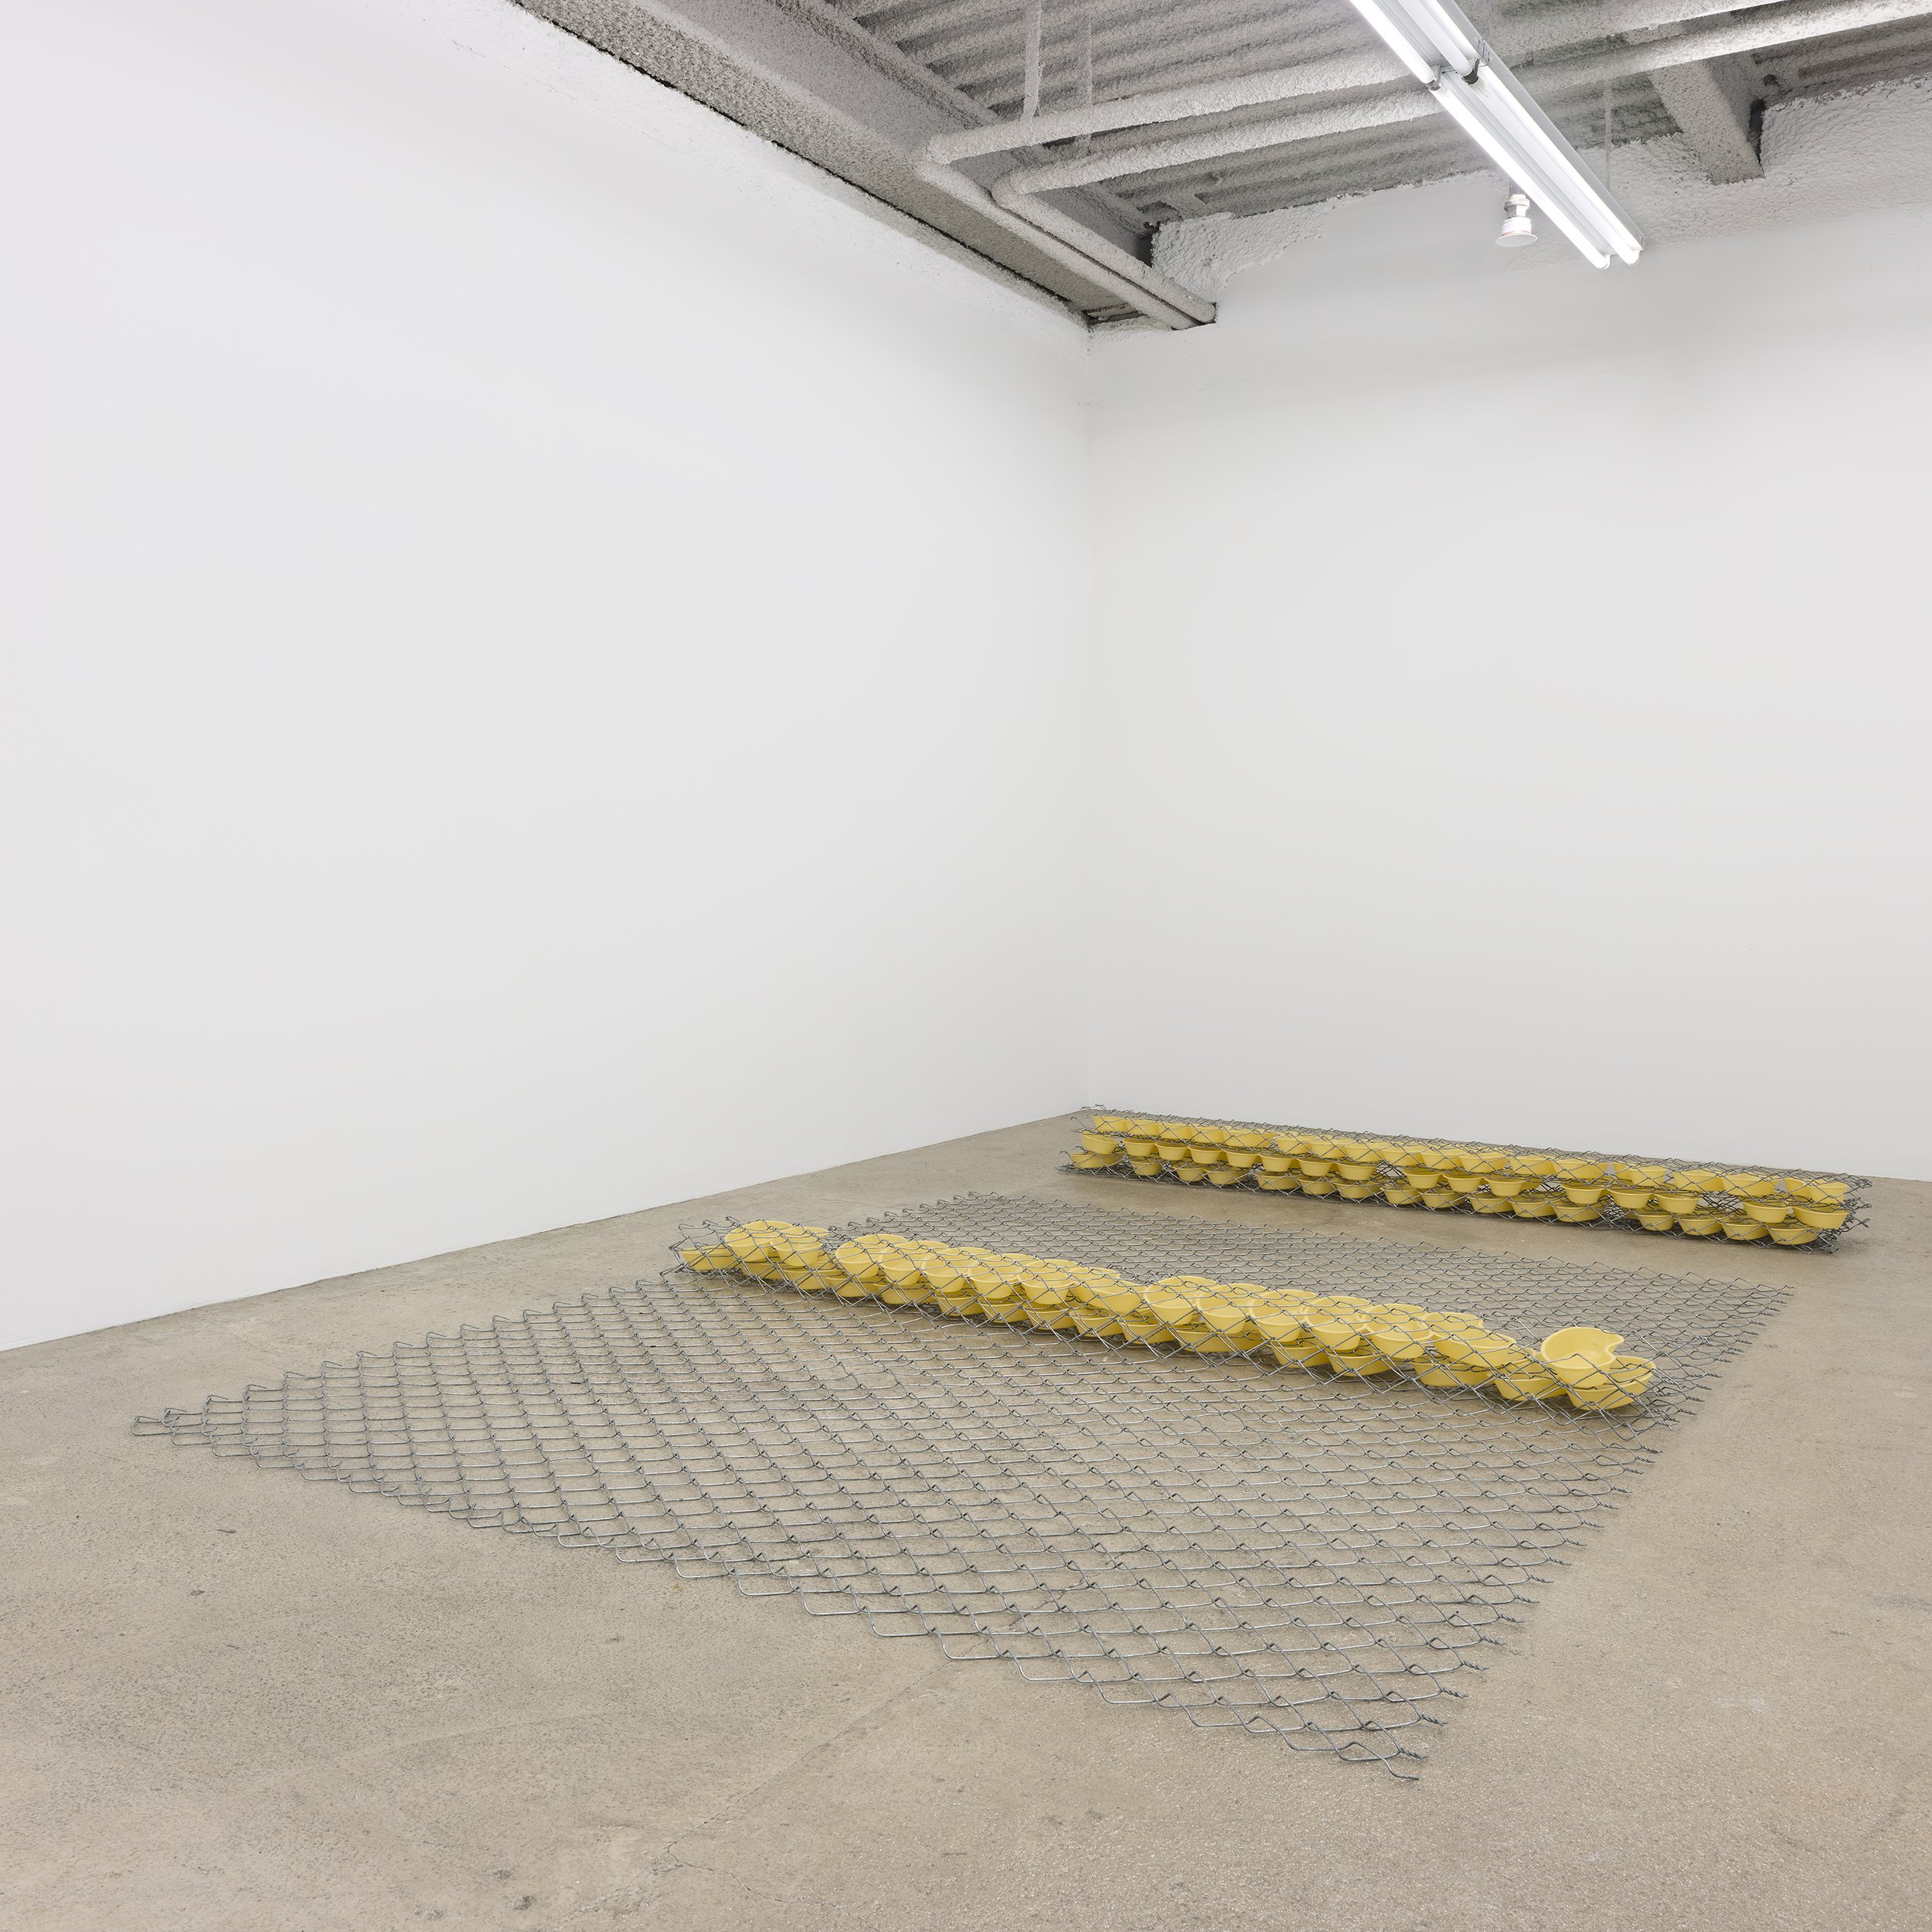  Bat-Ami Rivlin  Untitled (fence, bedpans) , 2021 chain link fencing, yellow kidney basins 8 x 120 x 72 inches (20 x 305 x 183 cm) Installation view M 2 3, New York, 2022 BR21 